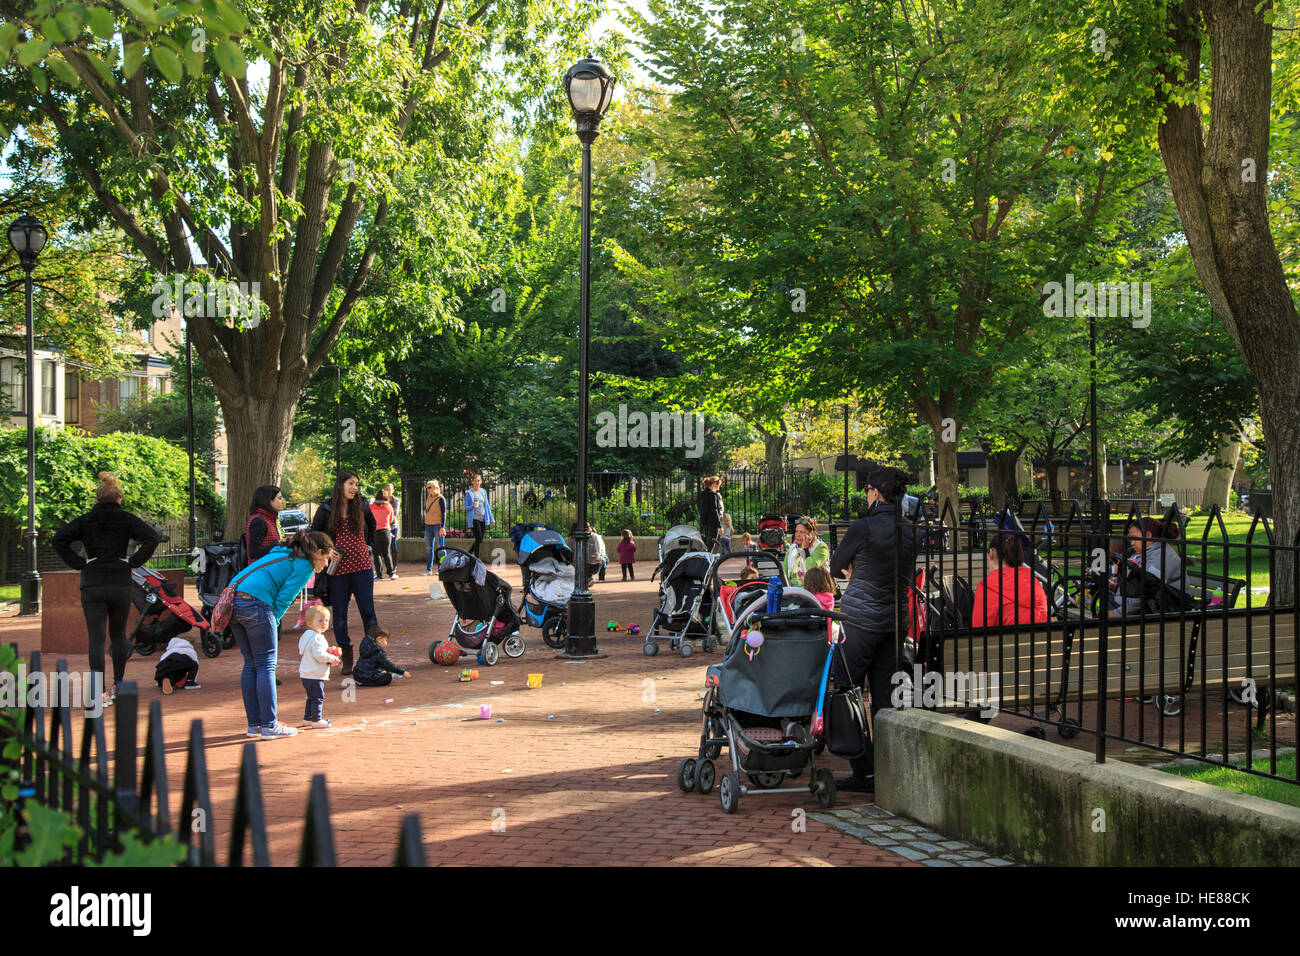 Mothers and Childen in Fitlers Square neighborhood or Rittenhouse Square area, Philadelphia, Pennsylvania, USA Stock Photo